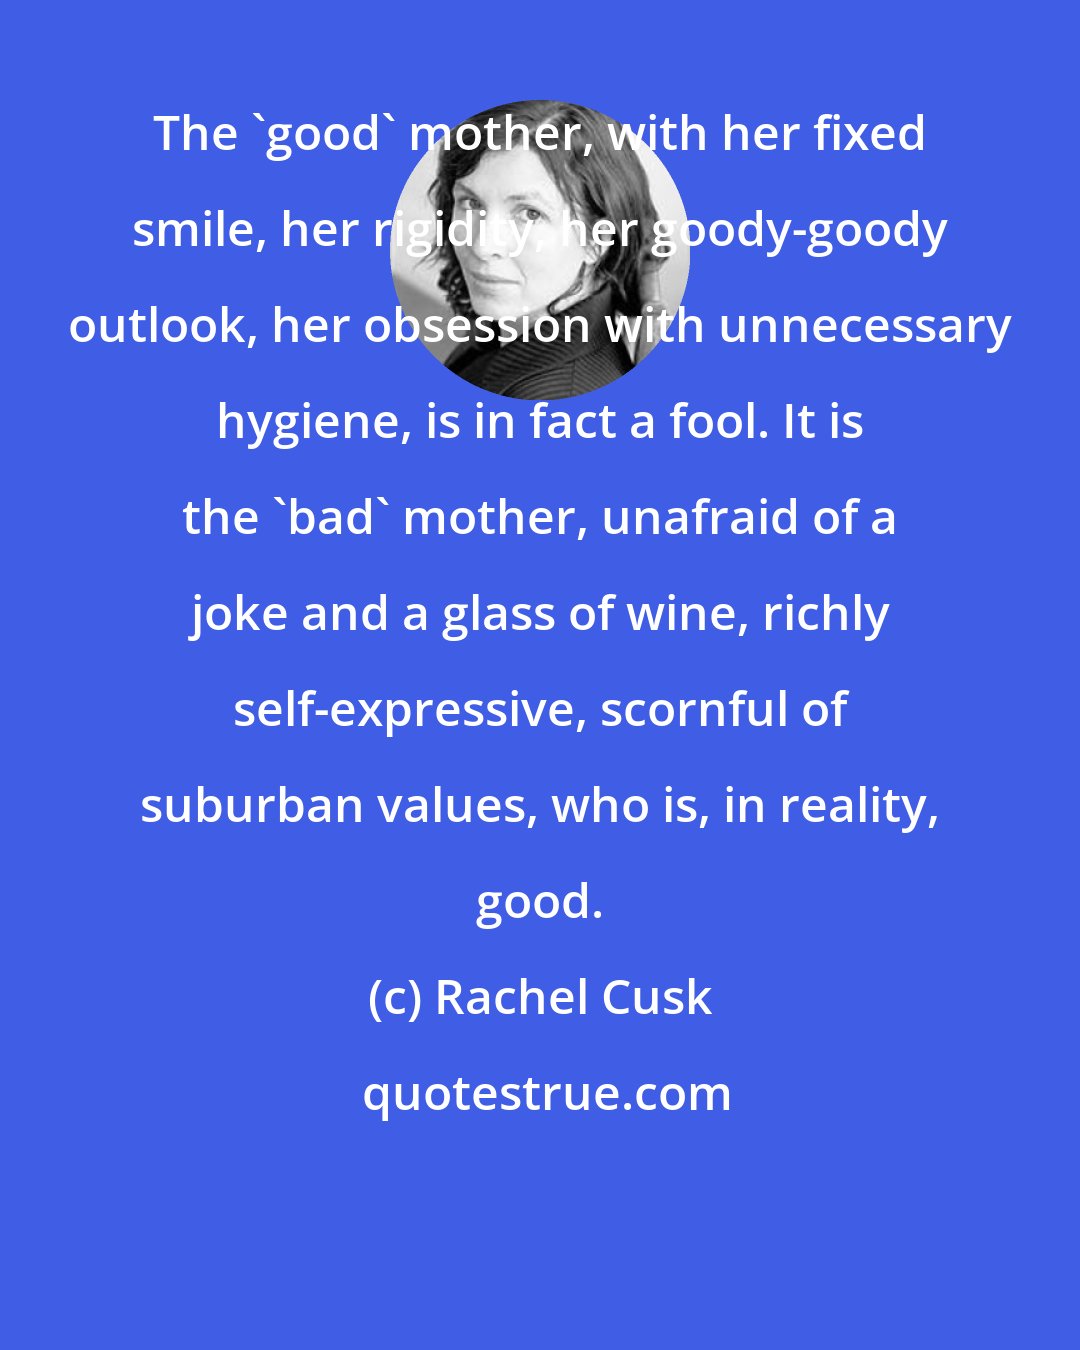 Rachel Cusk: The 'good' mother, with her fixed smile, her rigidity, her goody-goody outlook, her obsession with unnecessary hygiene, is in fact a fool. It is the 'bad' mother, unafraid of a joke and a glass of wine, richly self-expressive, scornful of suburban values, who is, in reality, good.